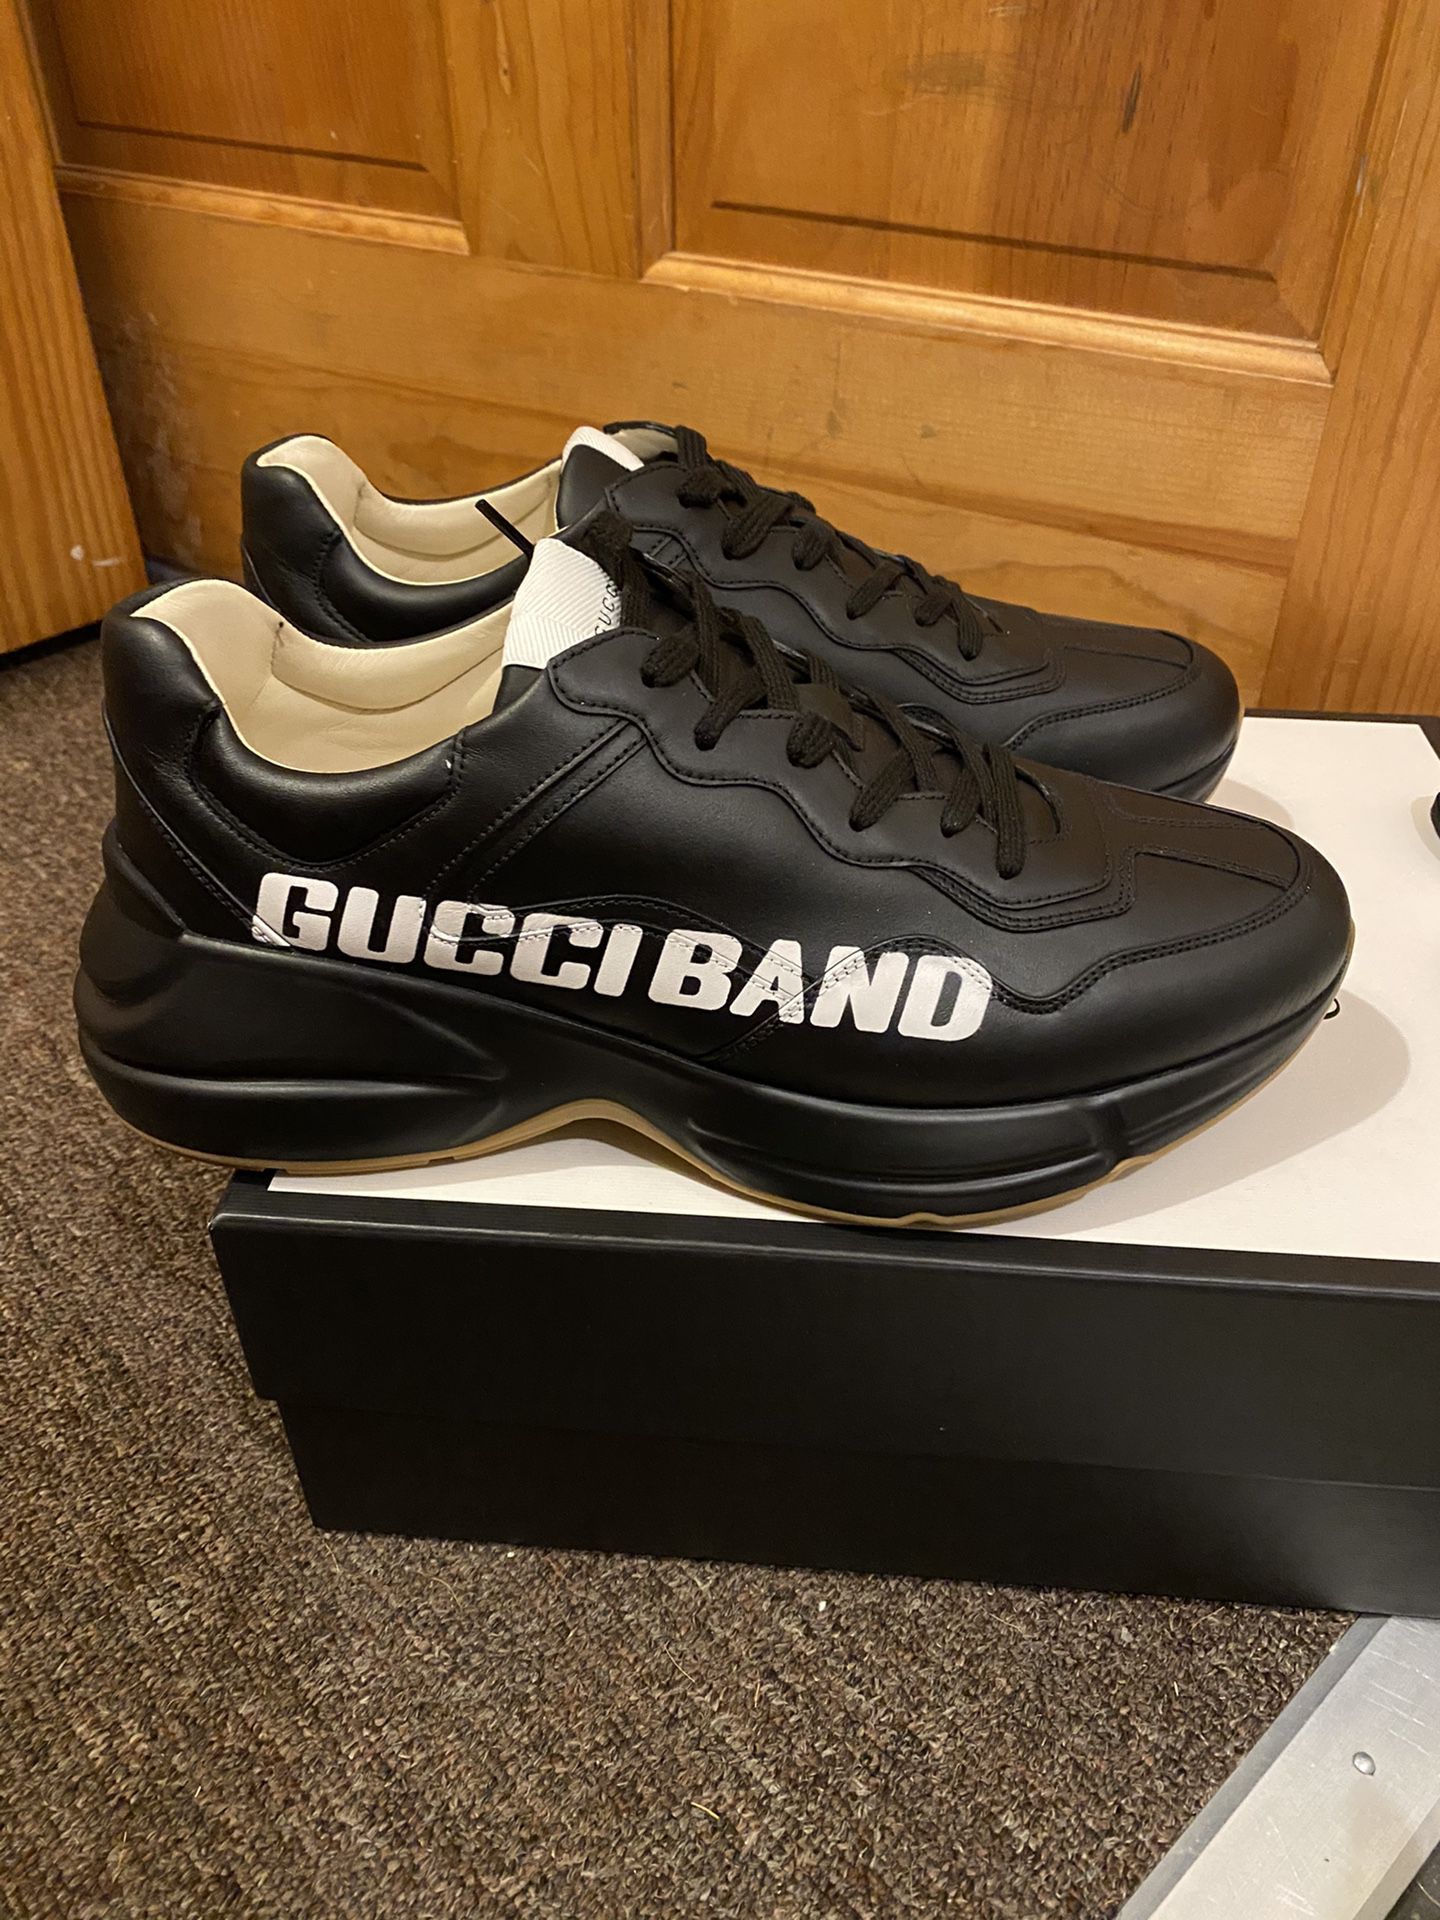 Gucci band sneakers size 11